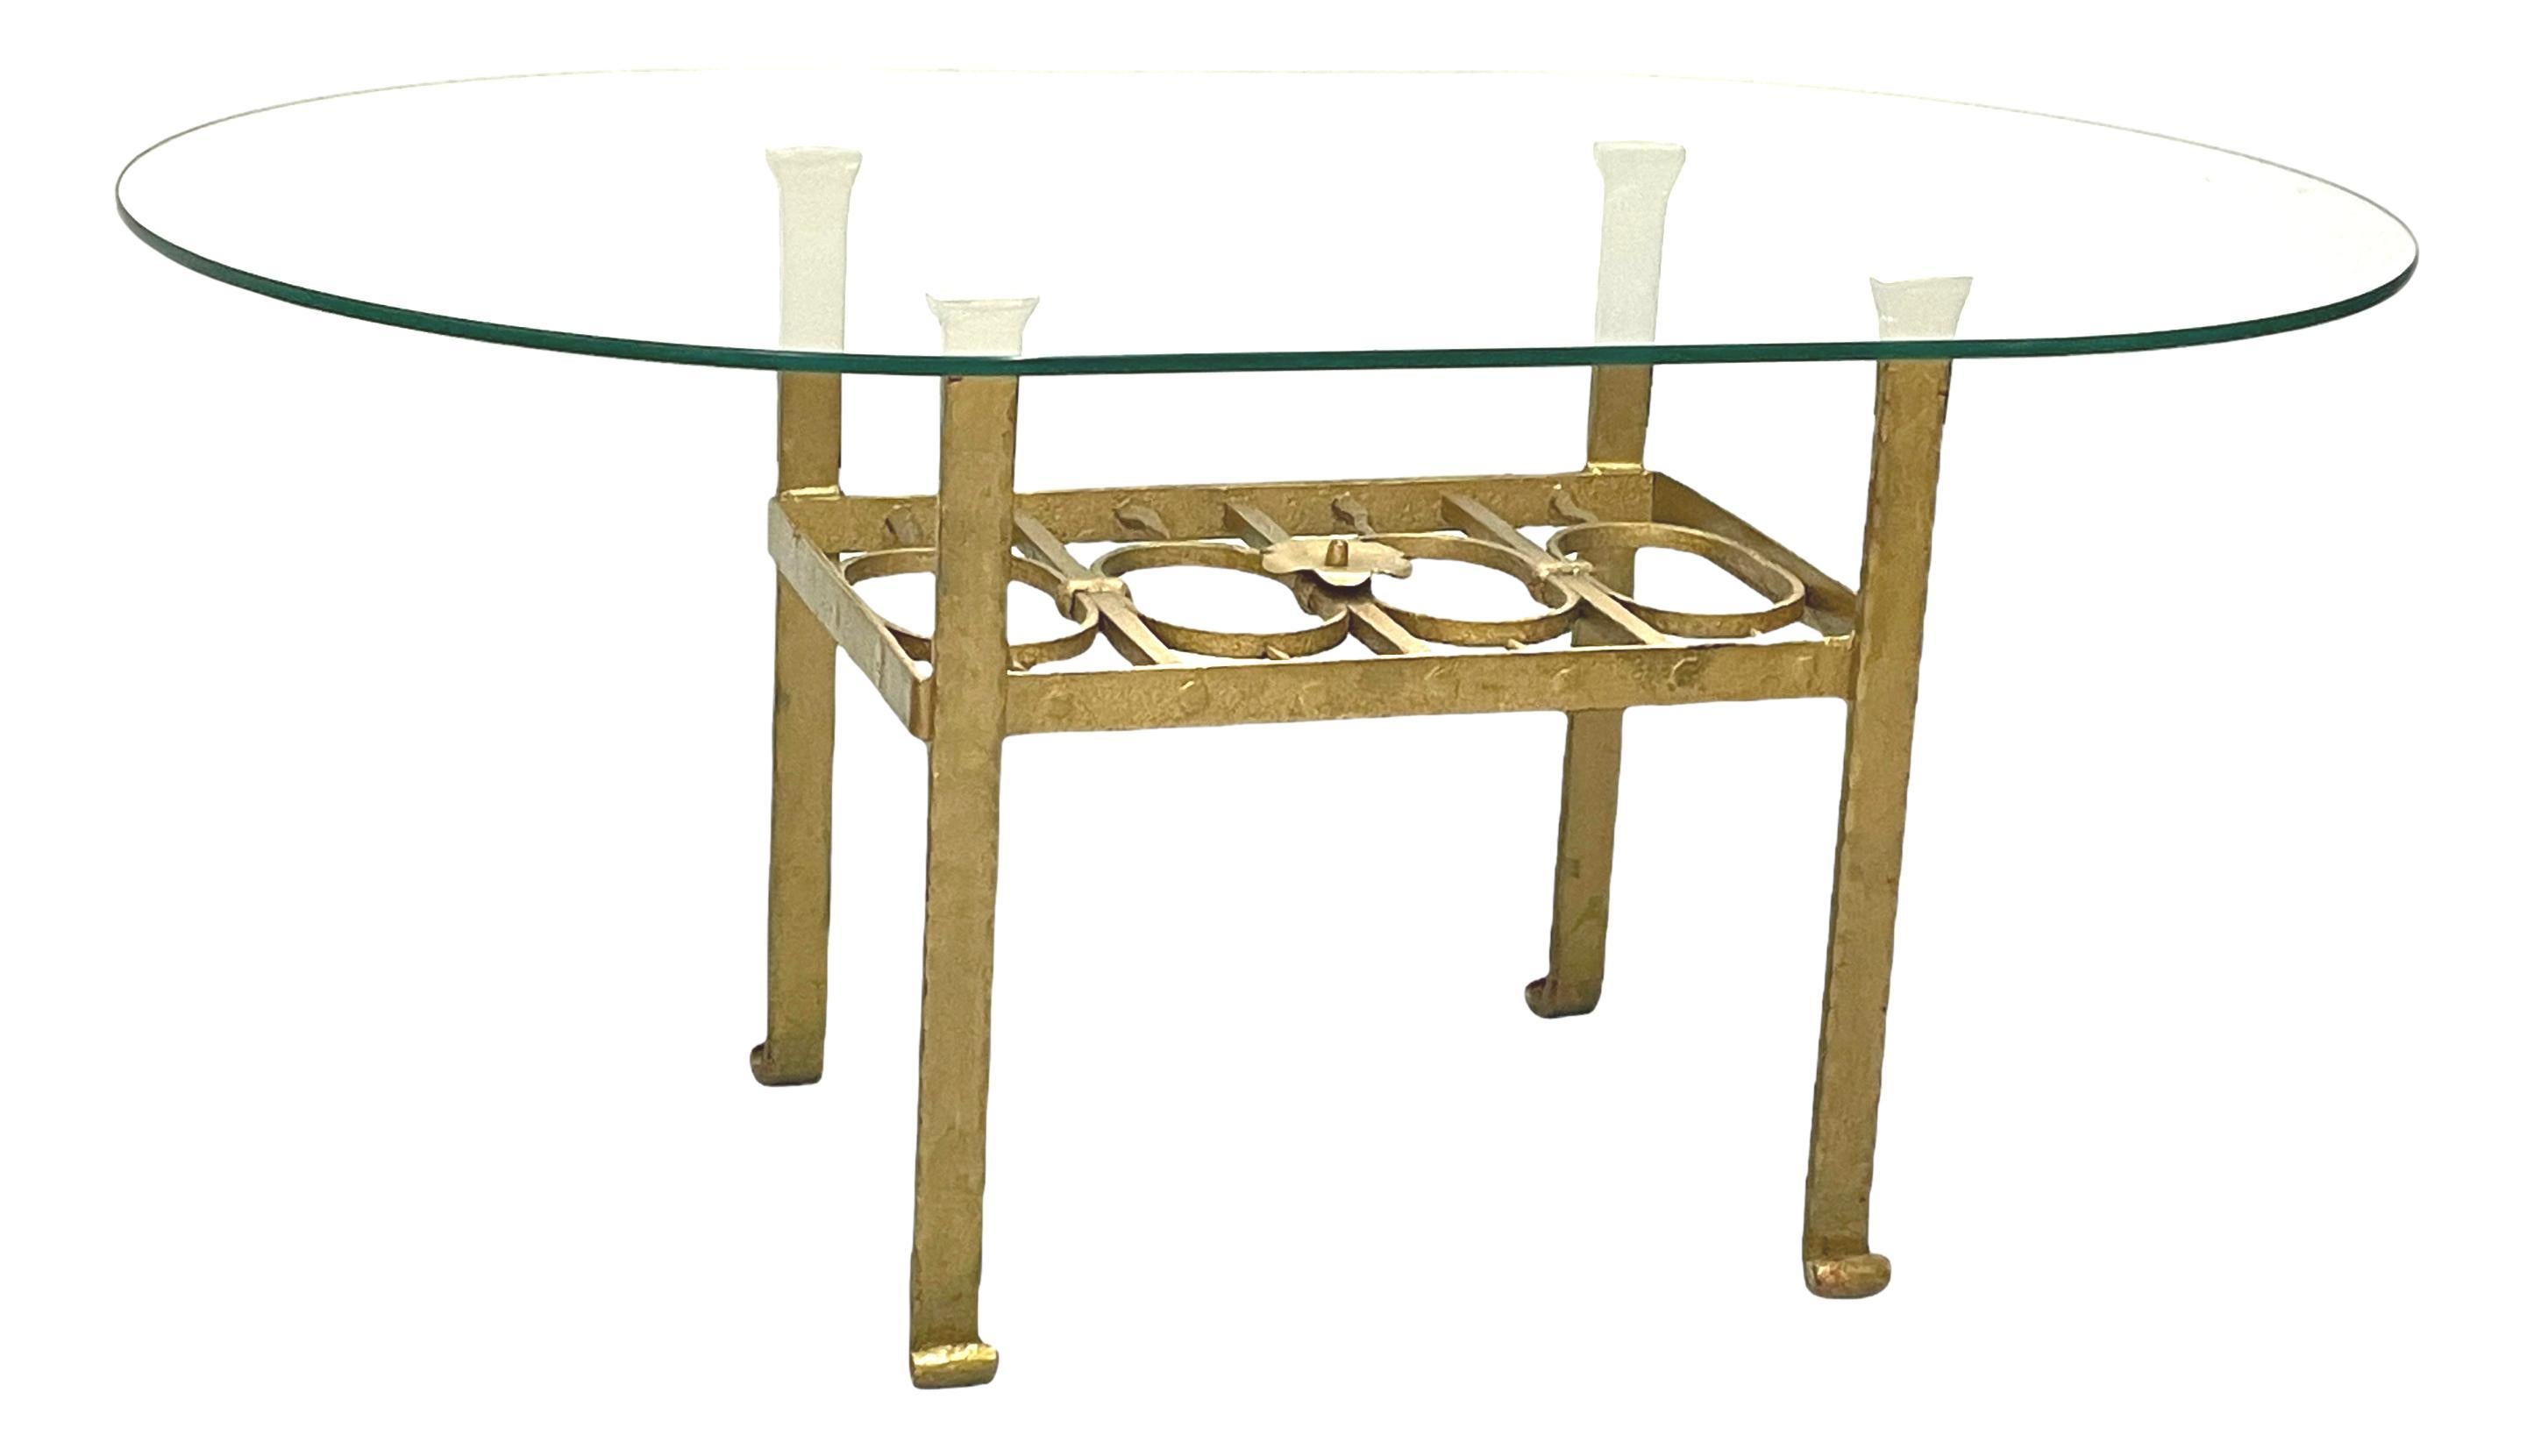 Offered is this beautiful Brutalist style gilded heavy iron coffee table with glass top. Made in Germany, circa 1960s. Glass tabletop in excellent condition. This table comes from the liquidation of the Continental Hotel in Bamberg, Germany. For